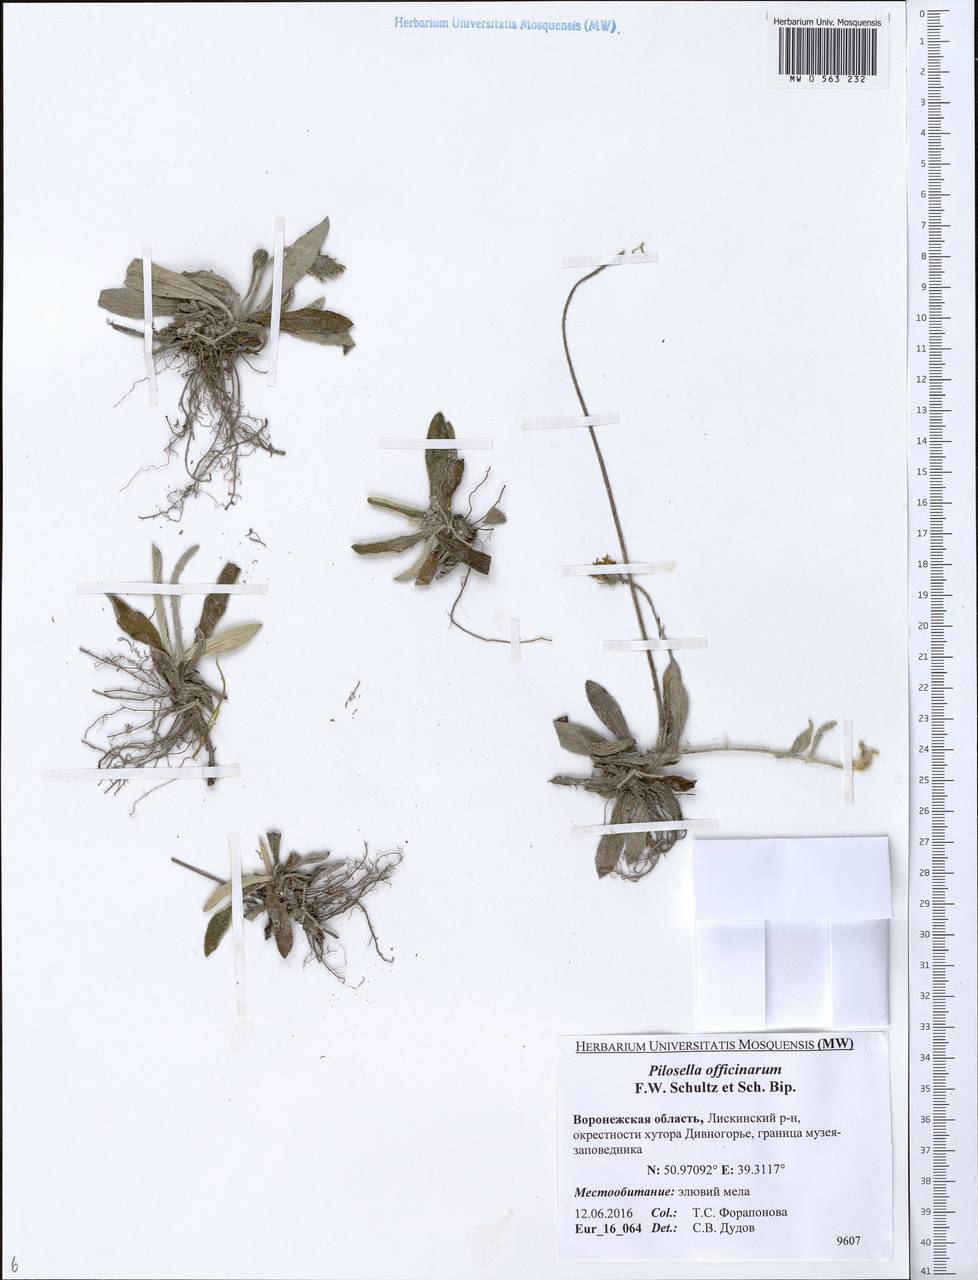 Pilosella officinarum Vaill., Eastern Europe, Central forest-and-steppe region (E6) (Russia)